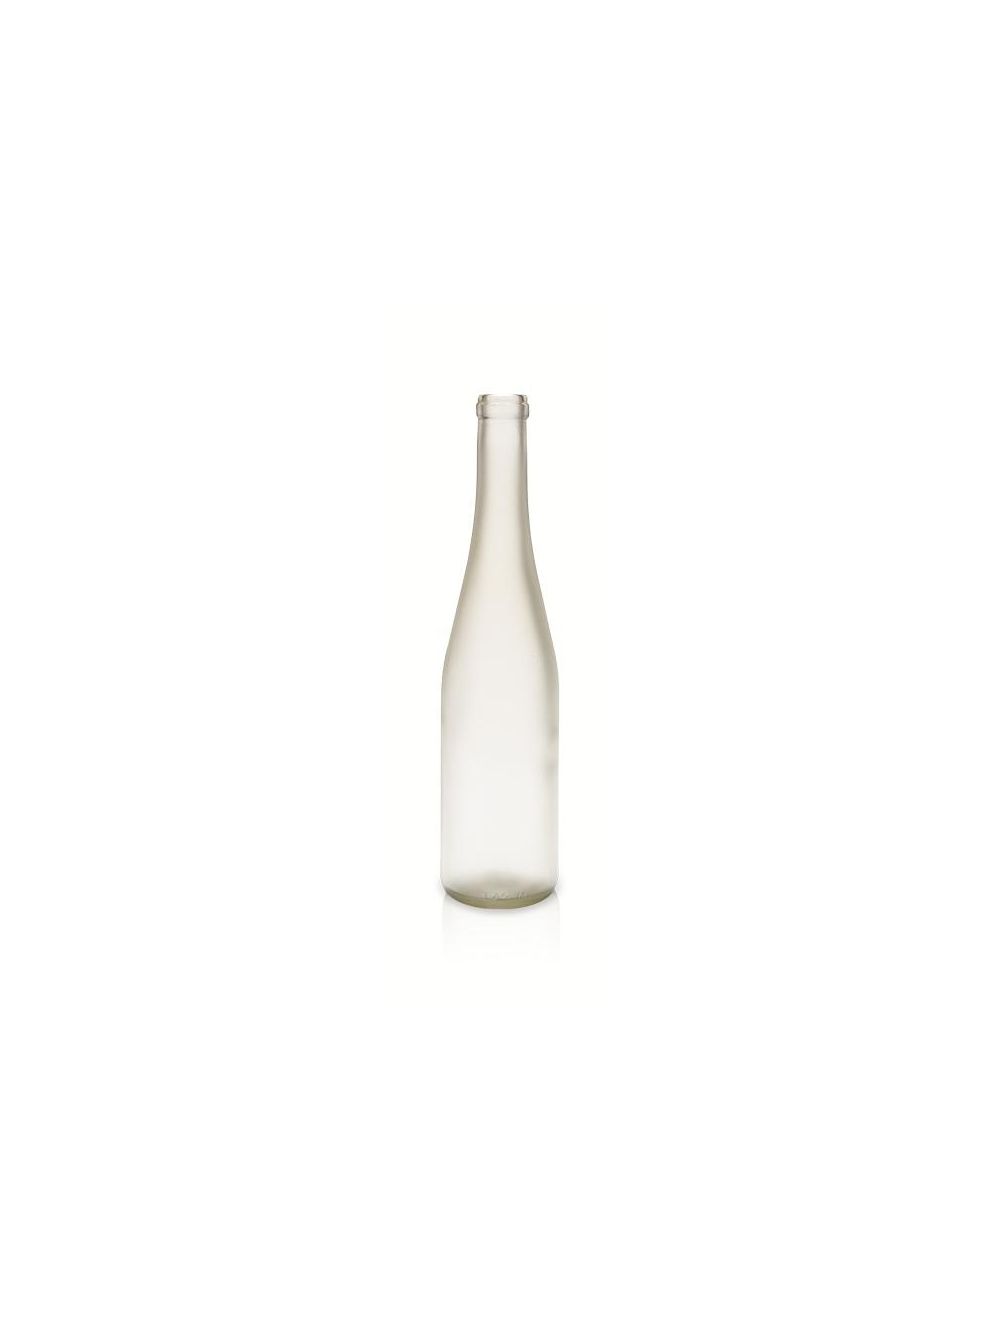 Download Wine Bottles 375ml Frosted Bottles For Home Winemaking